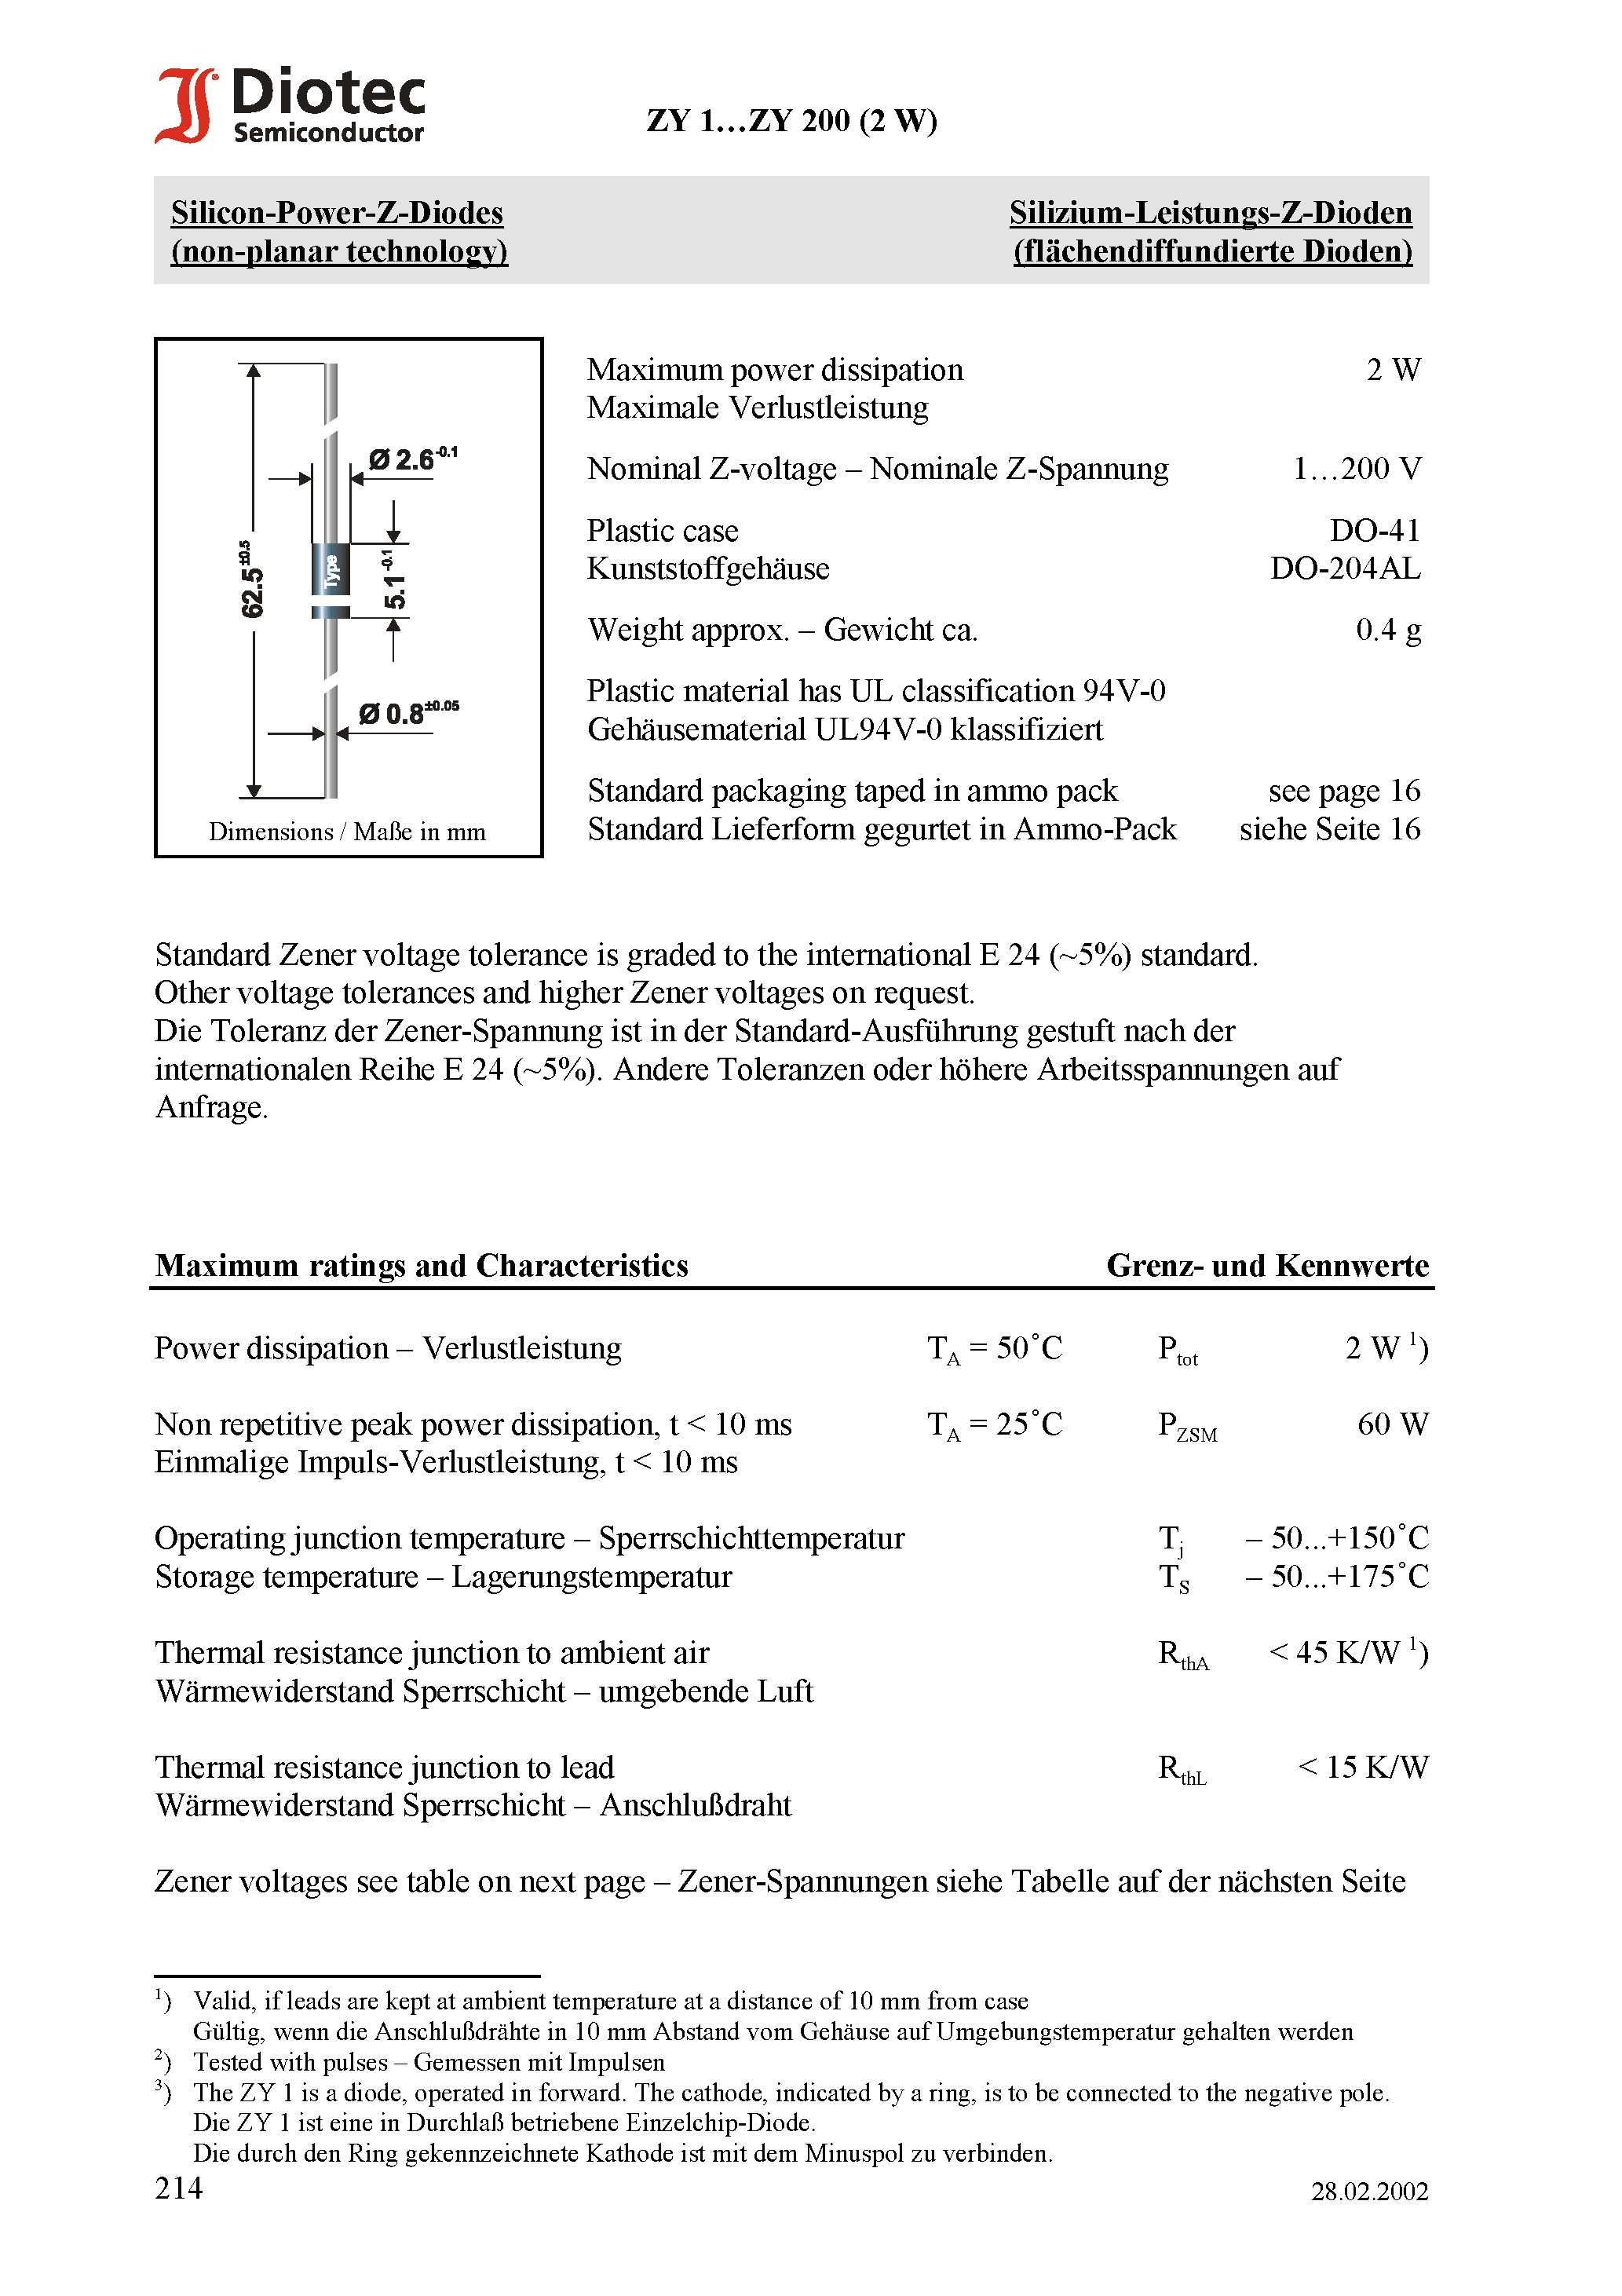 Datasheet ZY7.5 - Silicon-Power-Z-Diodes (non-planar technology) page 1